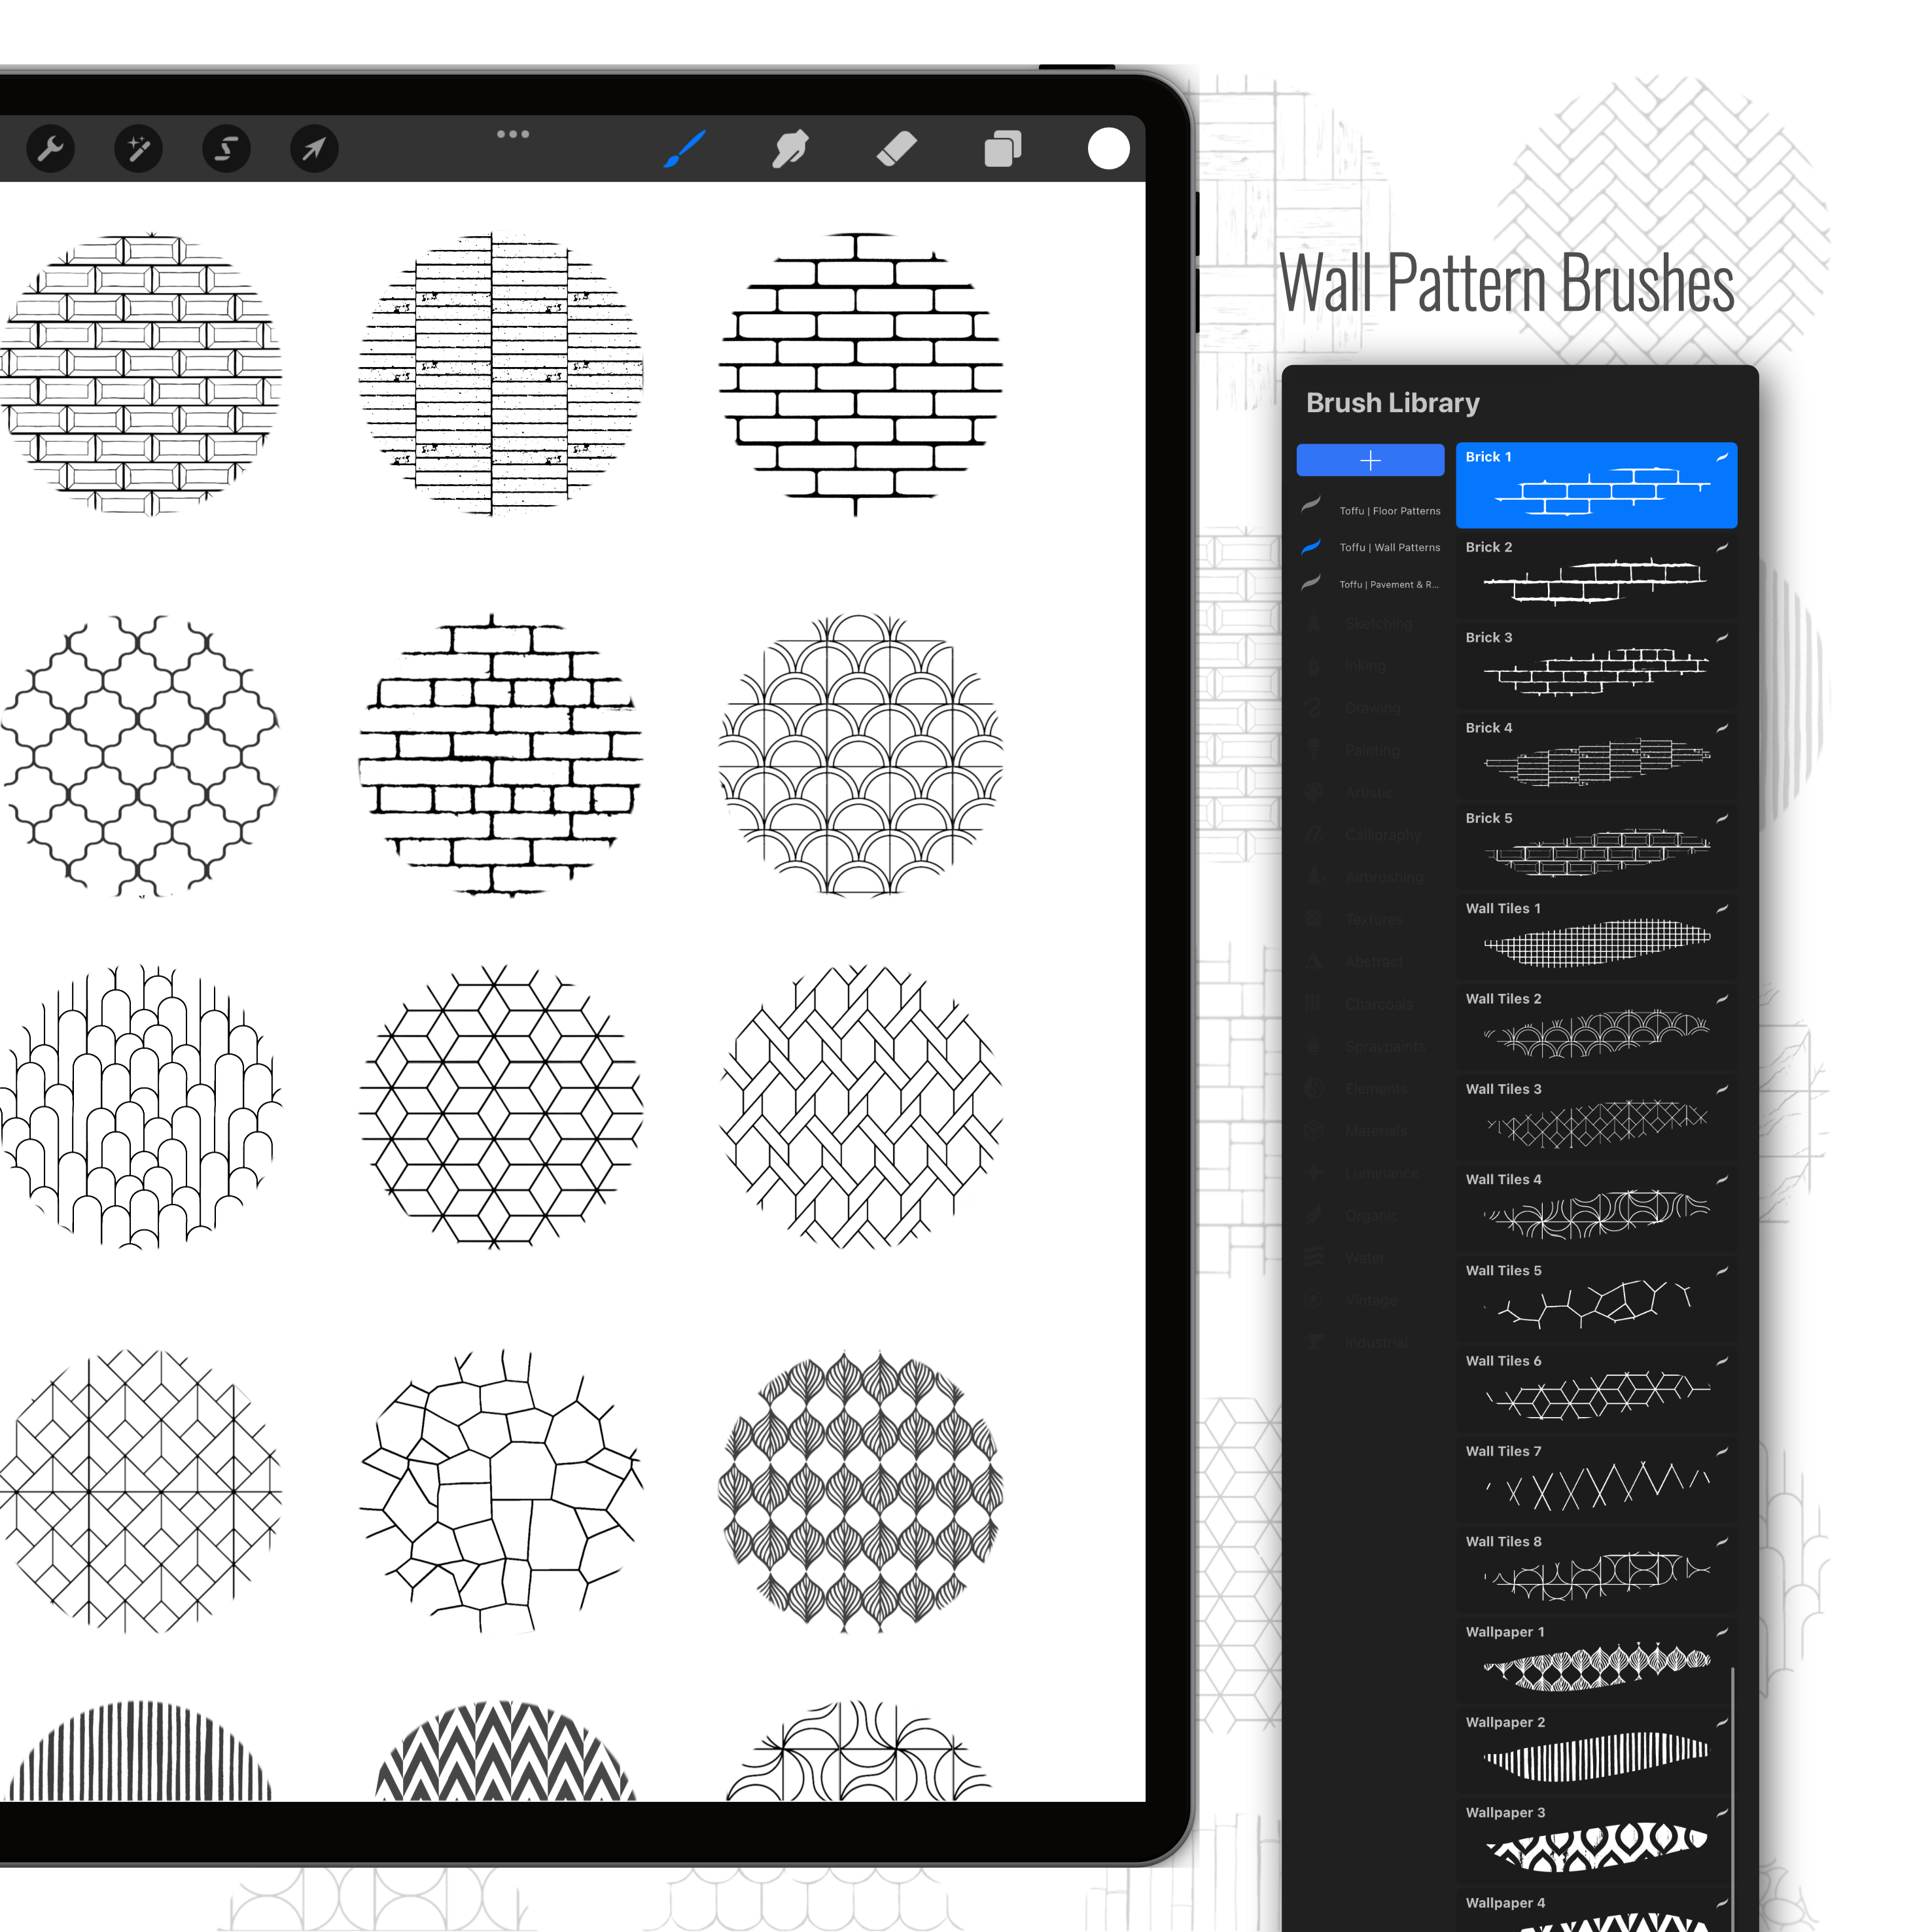 Procreate Architectural Patterns Brushset PNG - Toffu Co